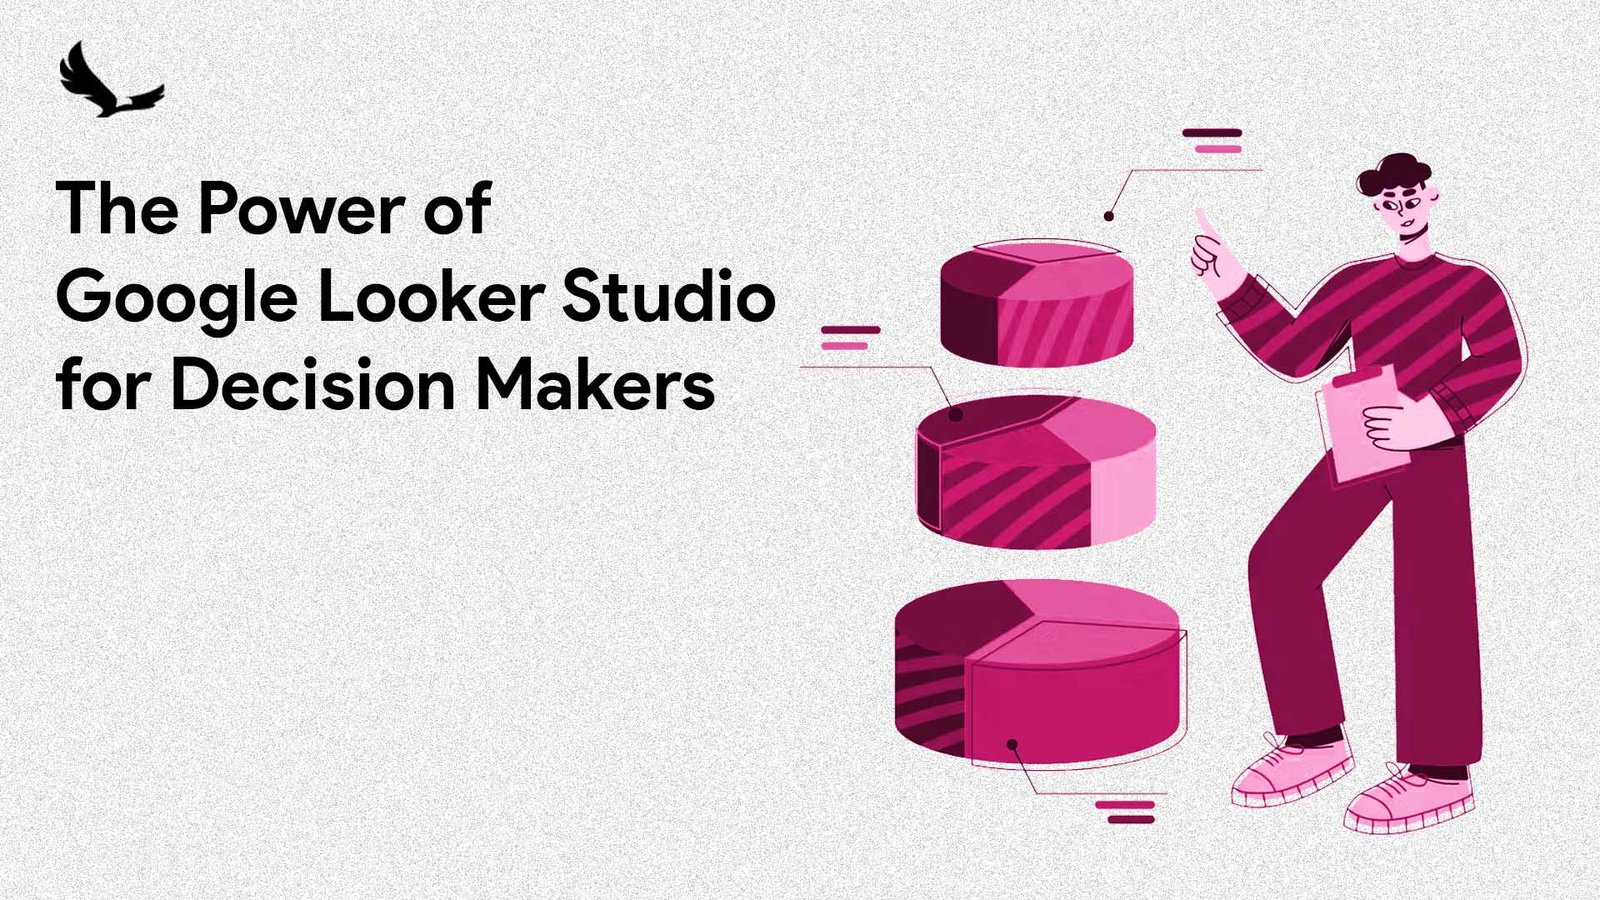 The Power of Google Looker Studio for Decision Makers